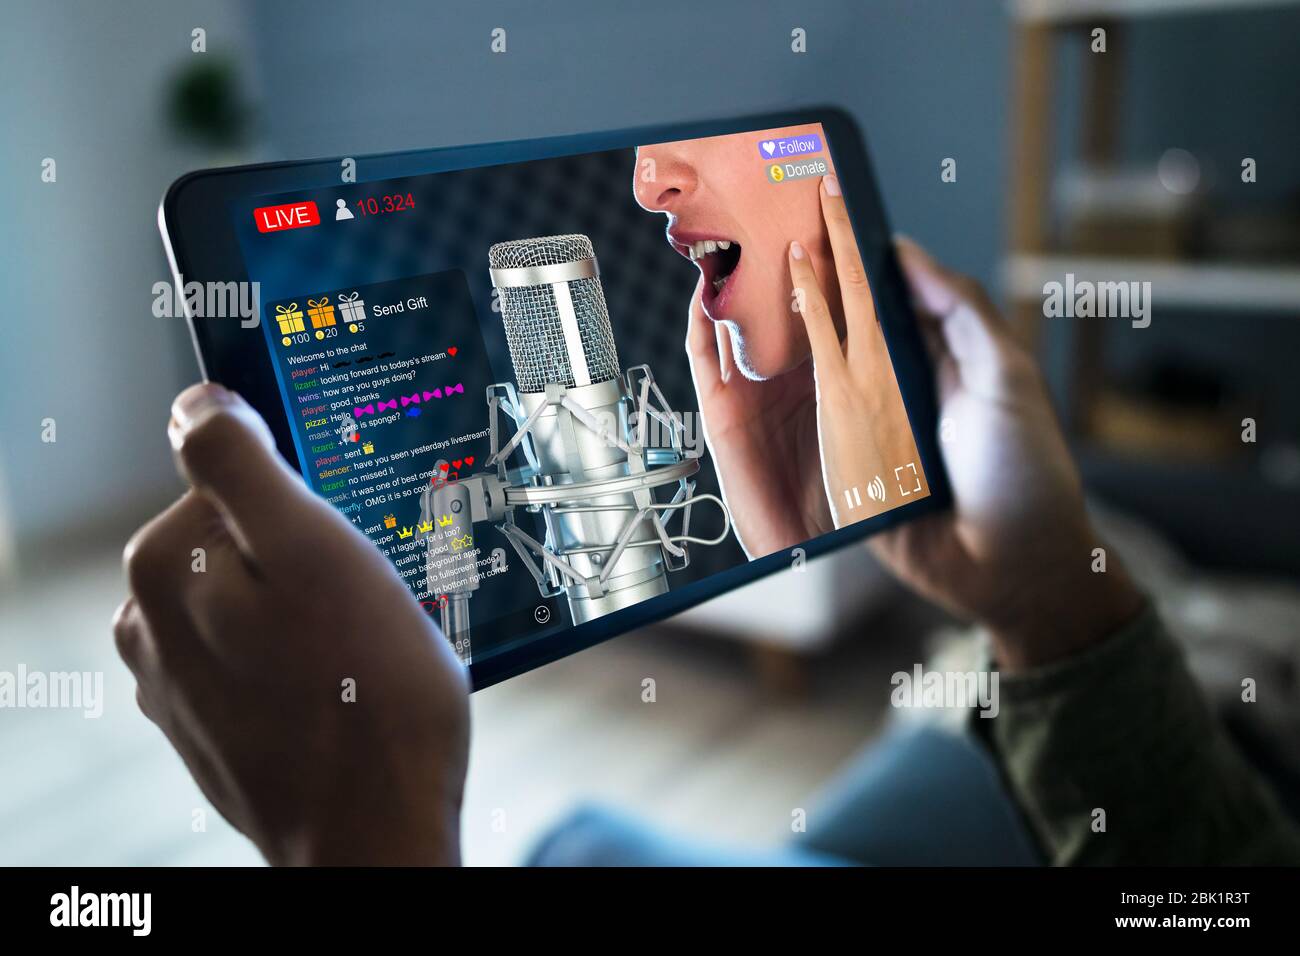 Streaming Live Music Video With Singer On Tablet Computer Stock Photo